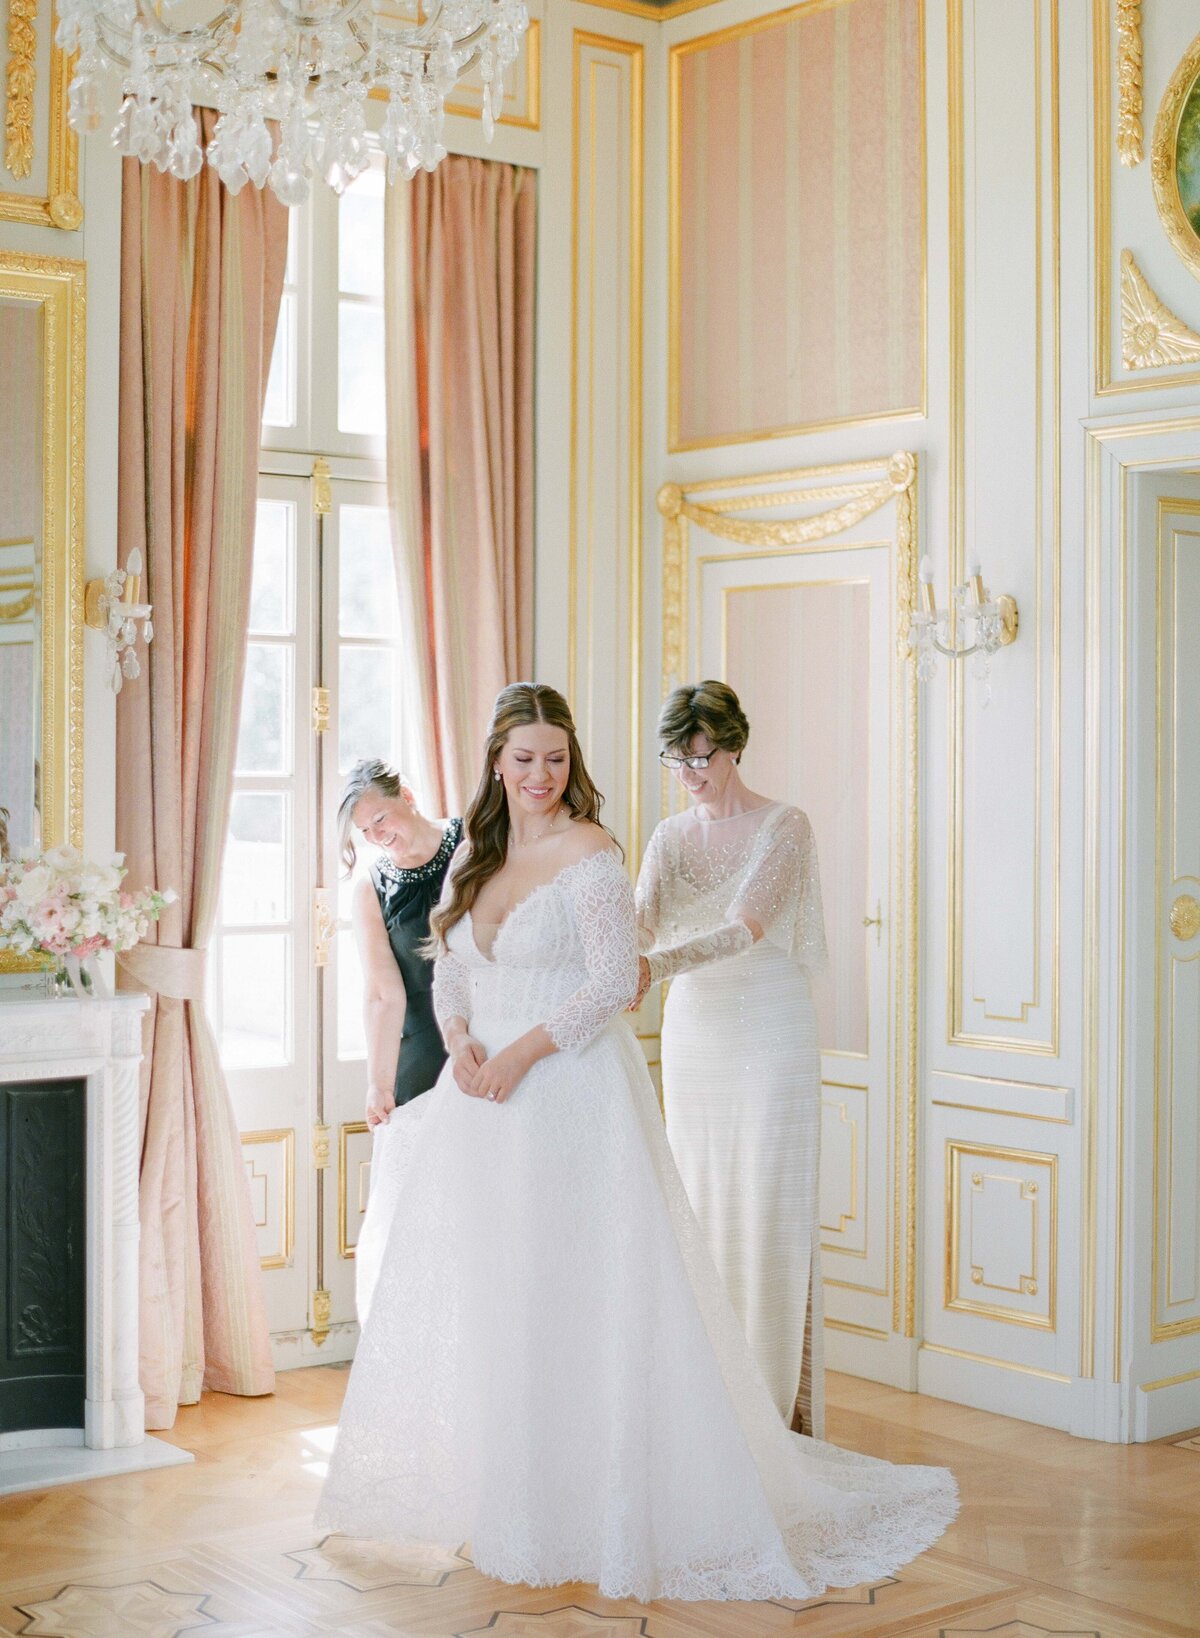 Jennifer Fox Weddings English speaking wedding planning & design agency in France crafting refined and bespoke weddings and celebrations Provence, Paris and destination Alyssa-Aaron-Molly-Carr-Photography-15